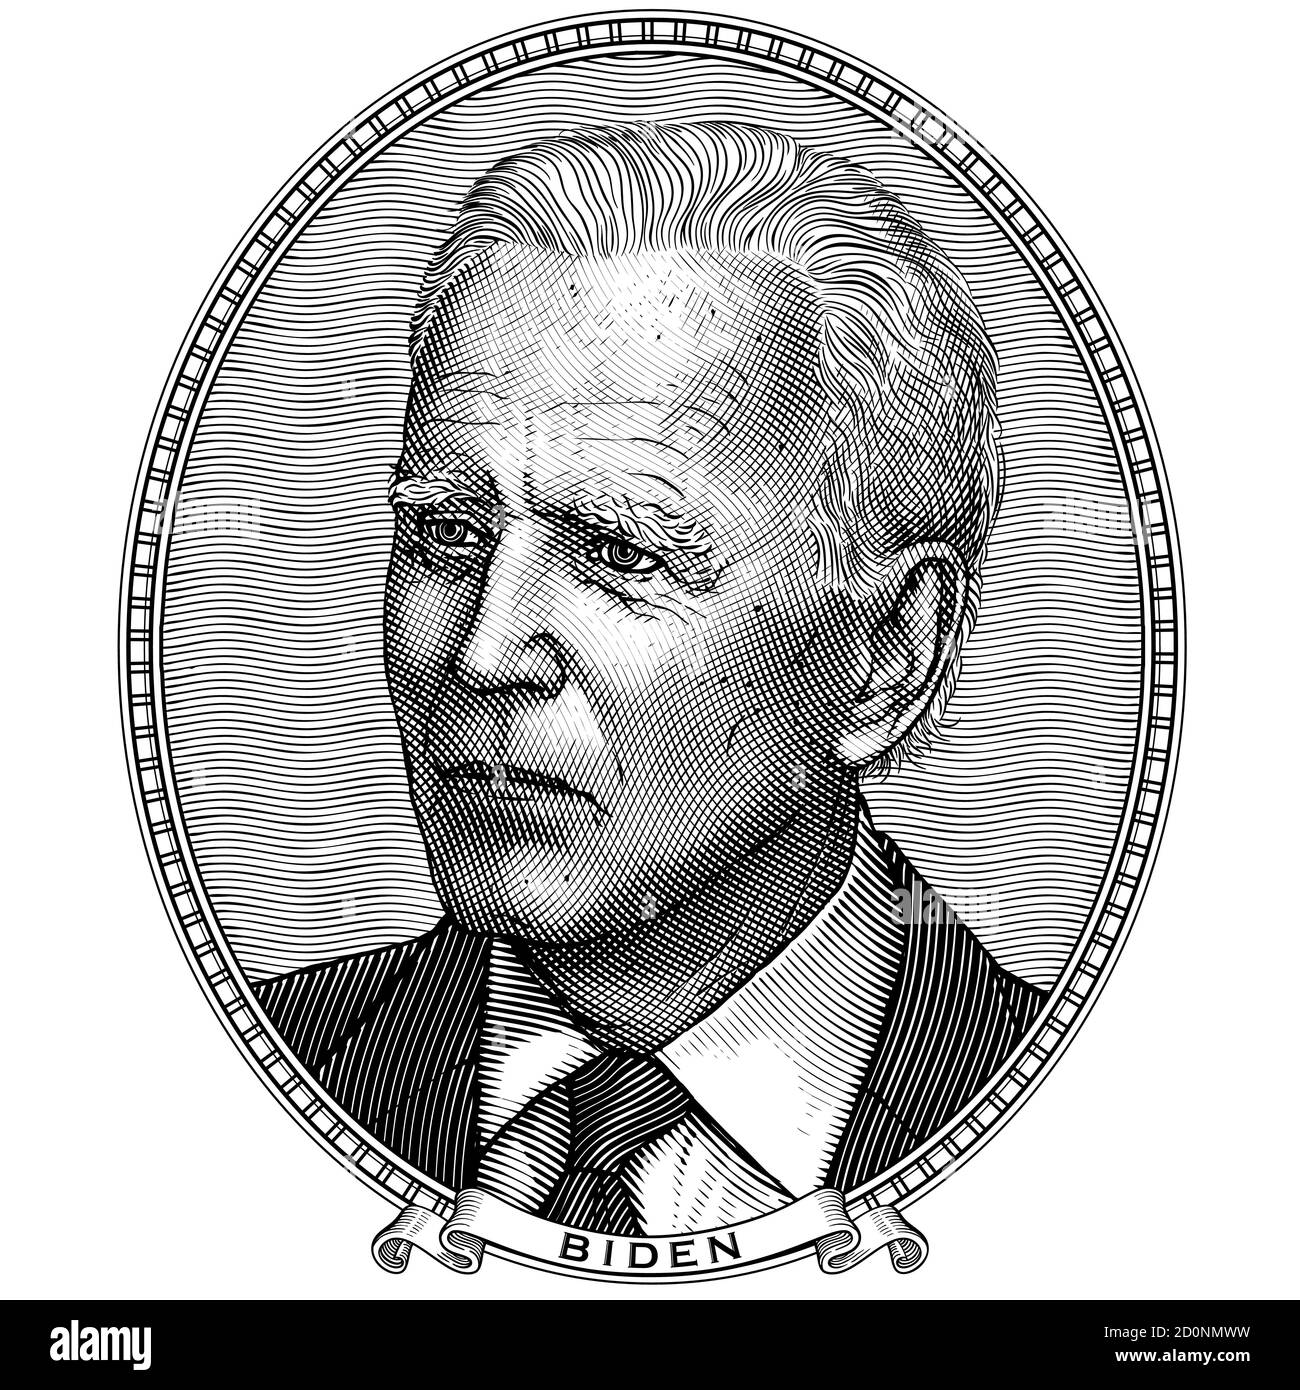 Joe Biden. Vector engraving in the vintage style. Oval frame portrait of Democratic presidential nominee for election in USA. Print and sticker. Stock Vector